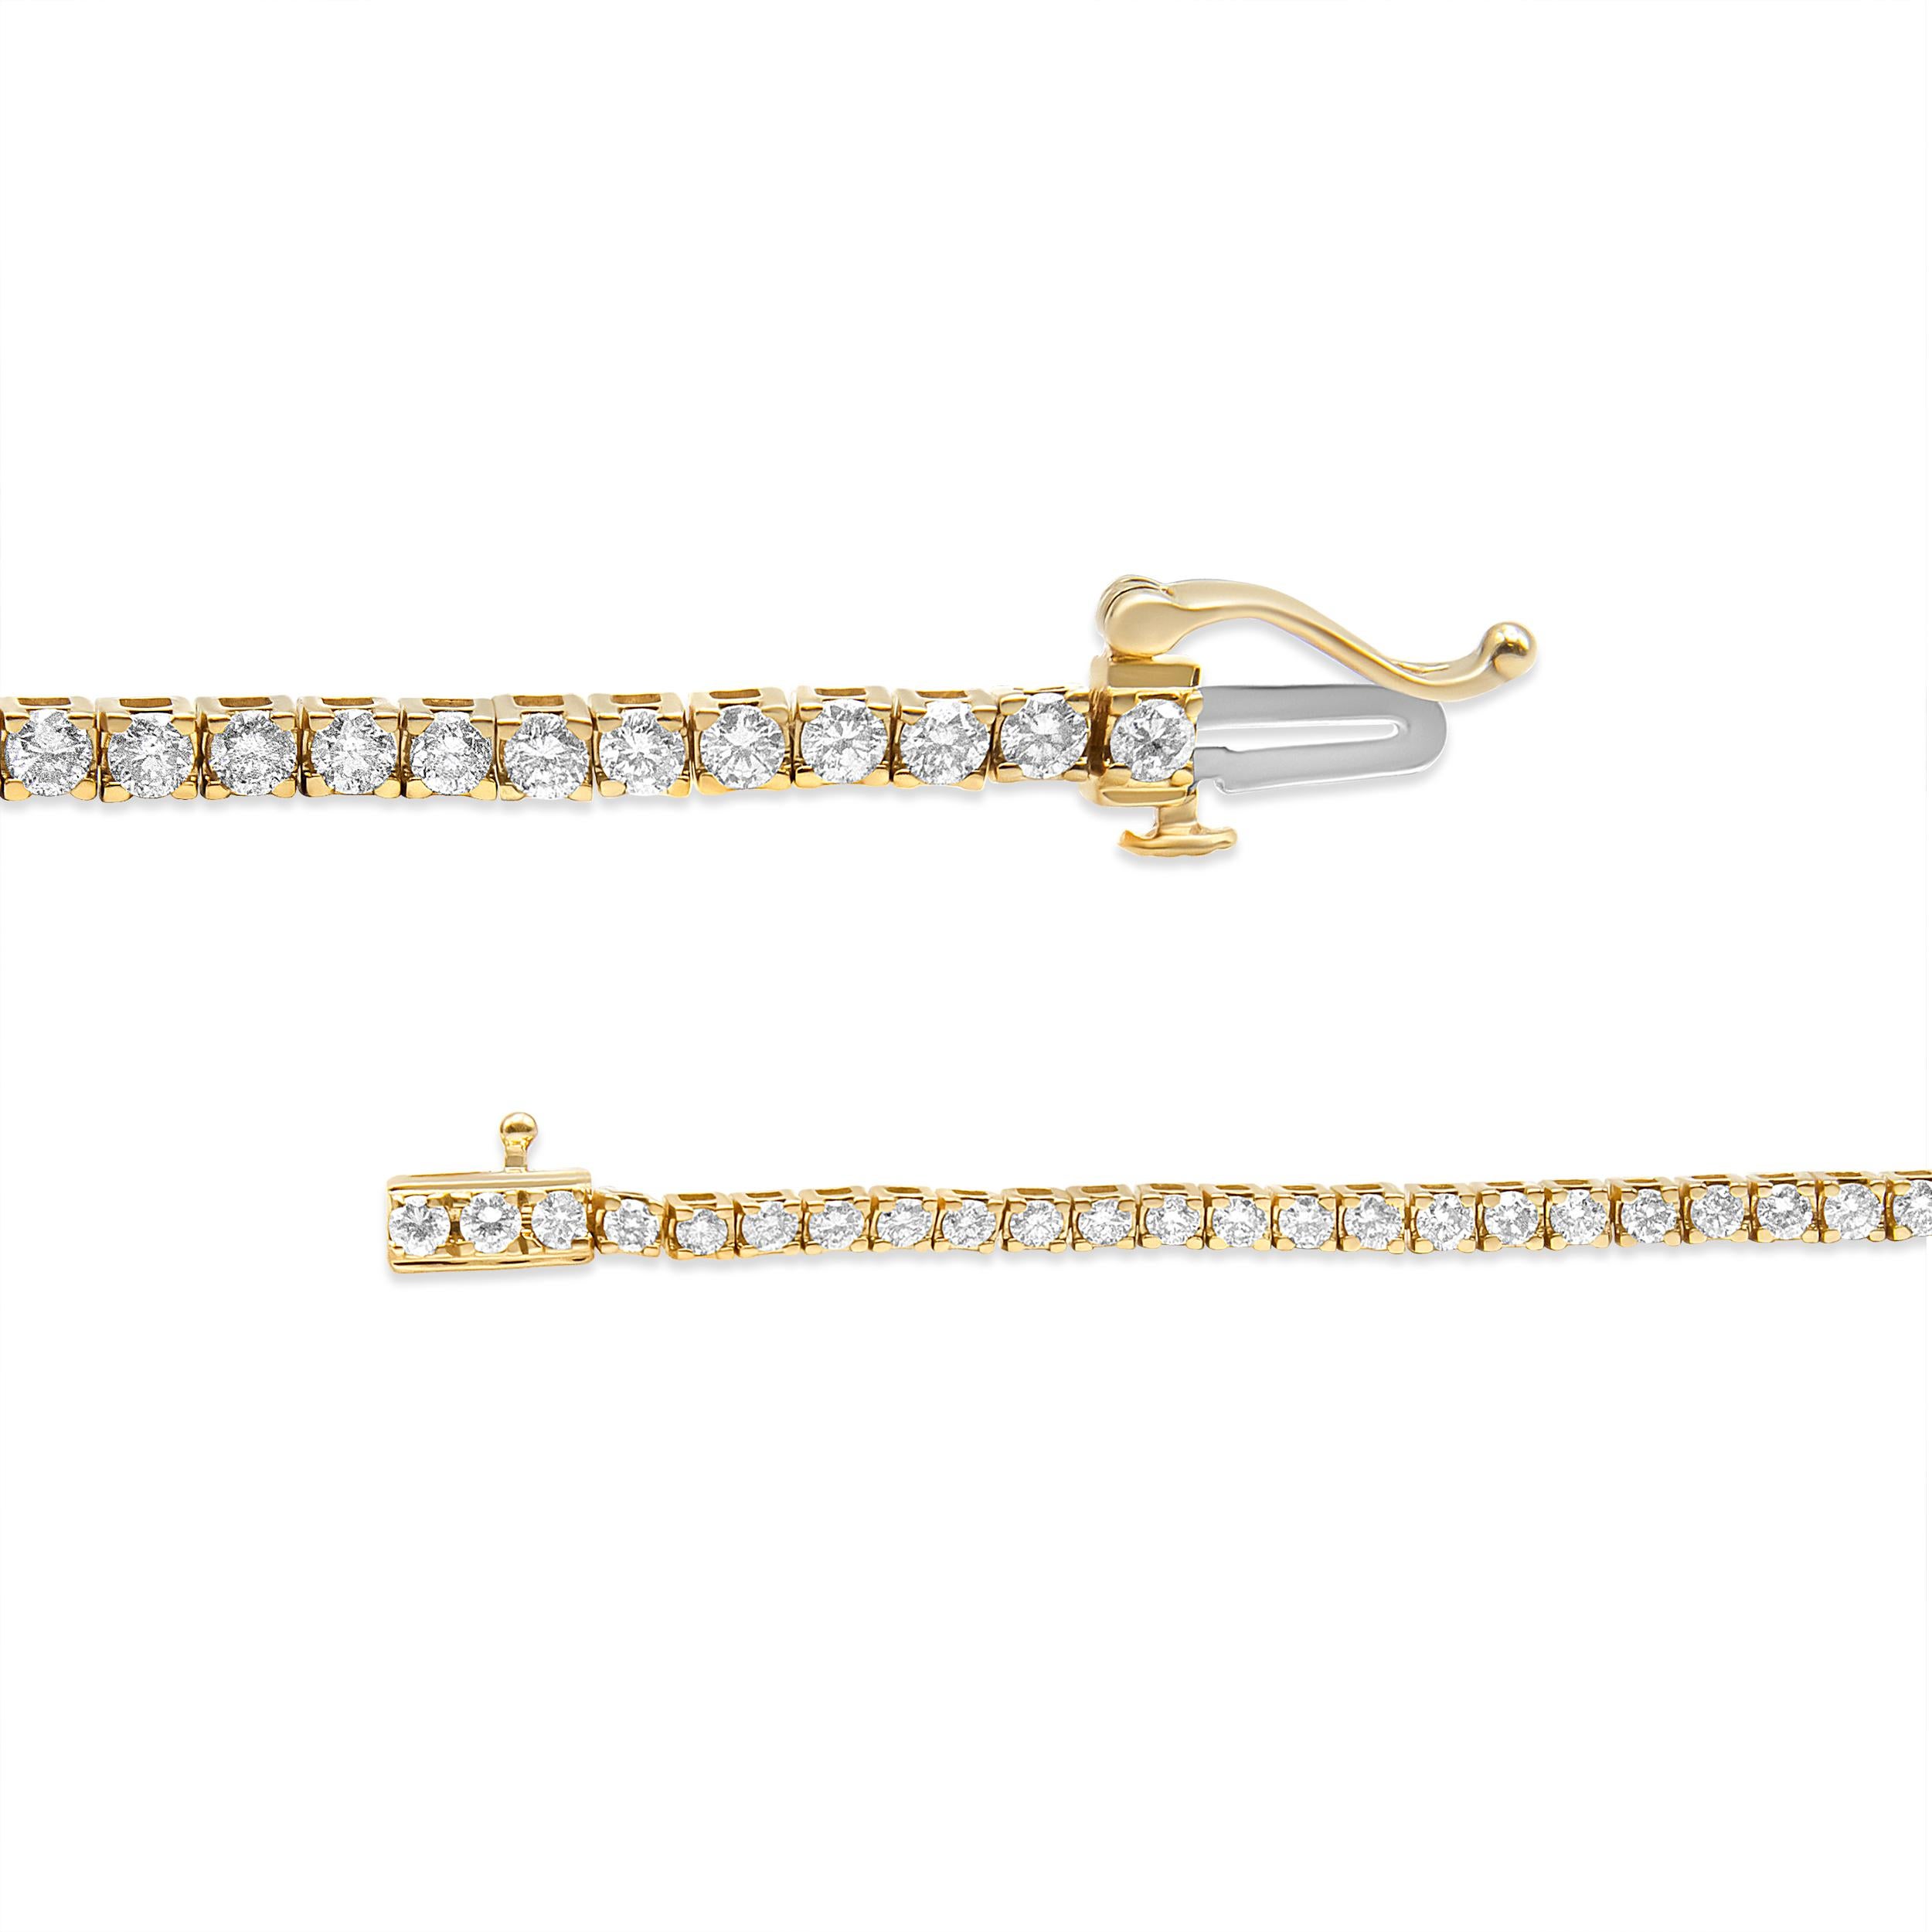 Can’t get enough of tennis bracelets? Here’s one that should be on your radar. Instead of the usual white gold bracelet, this piece starts with a 14K yellow gold base that beautifully contrasts against the natural round diamonds. The 69 round,